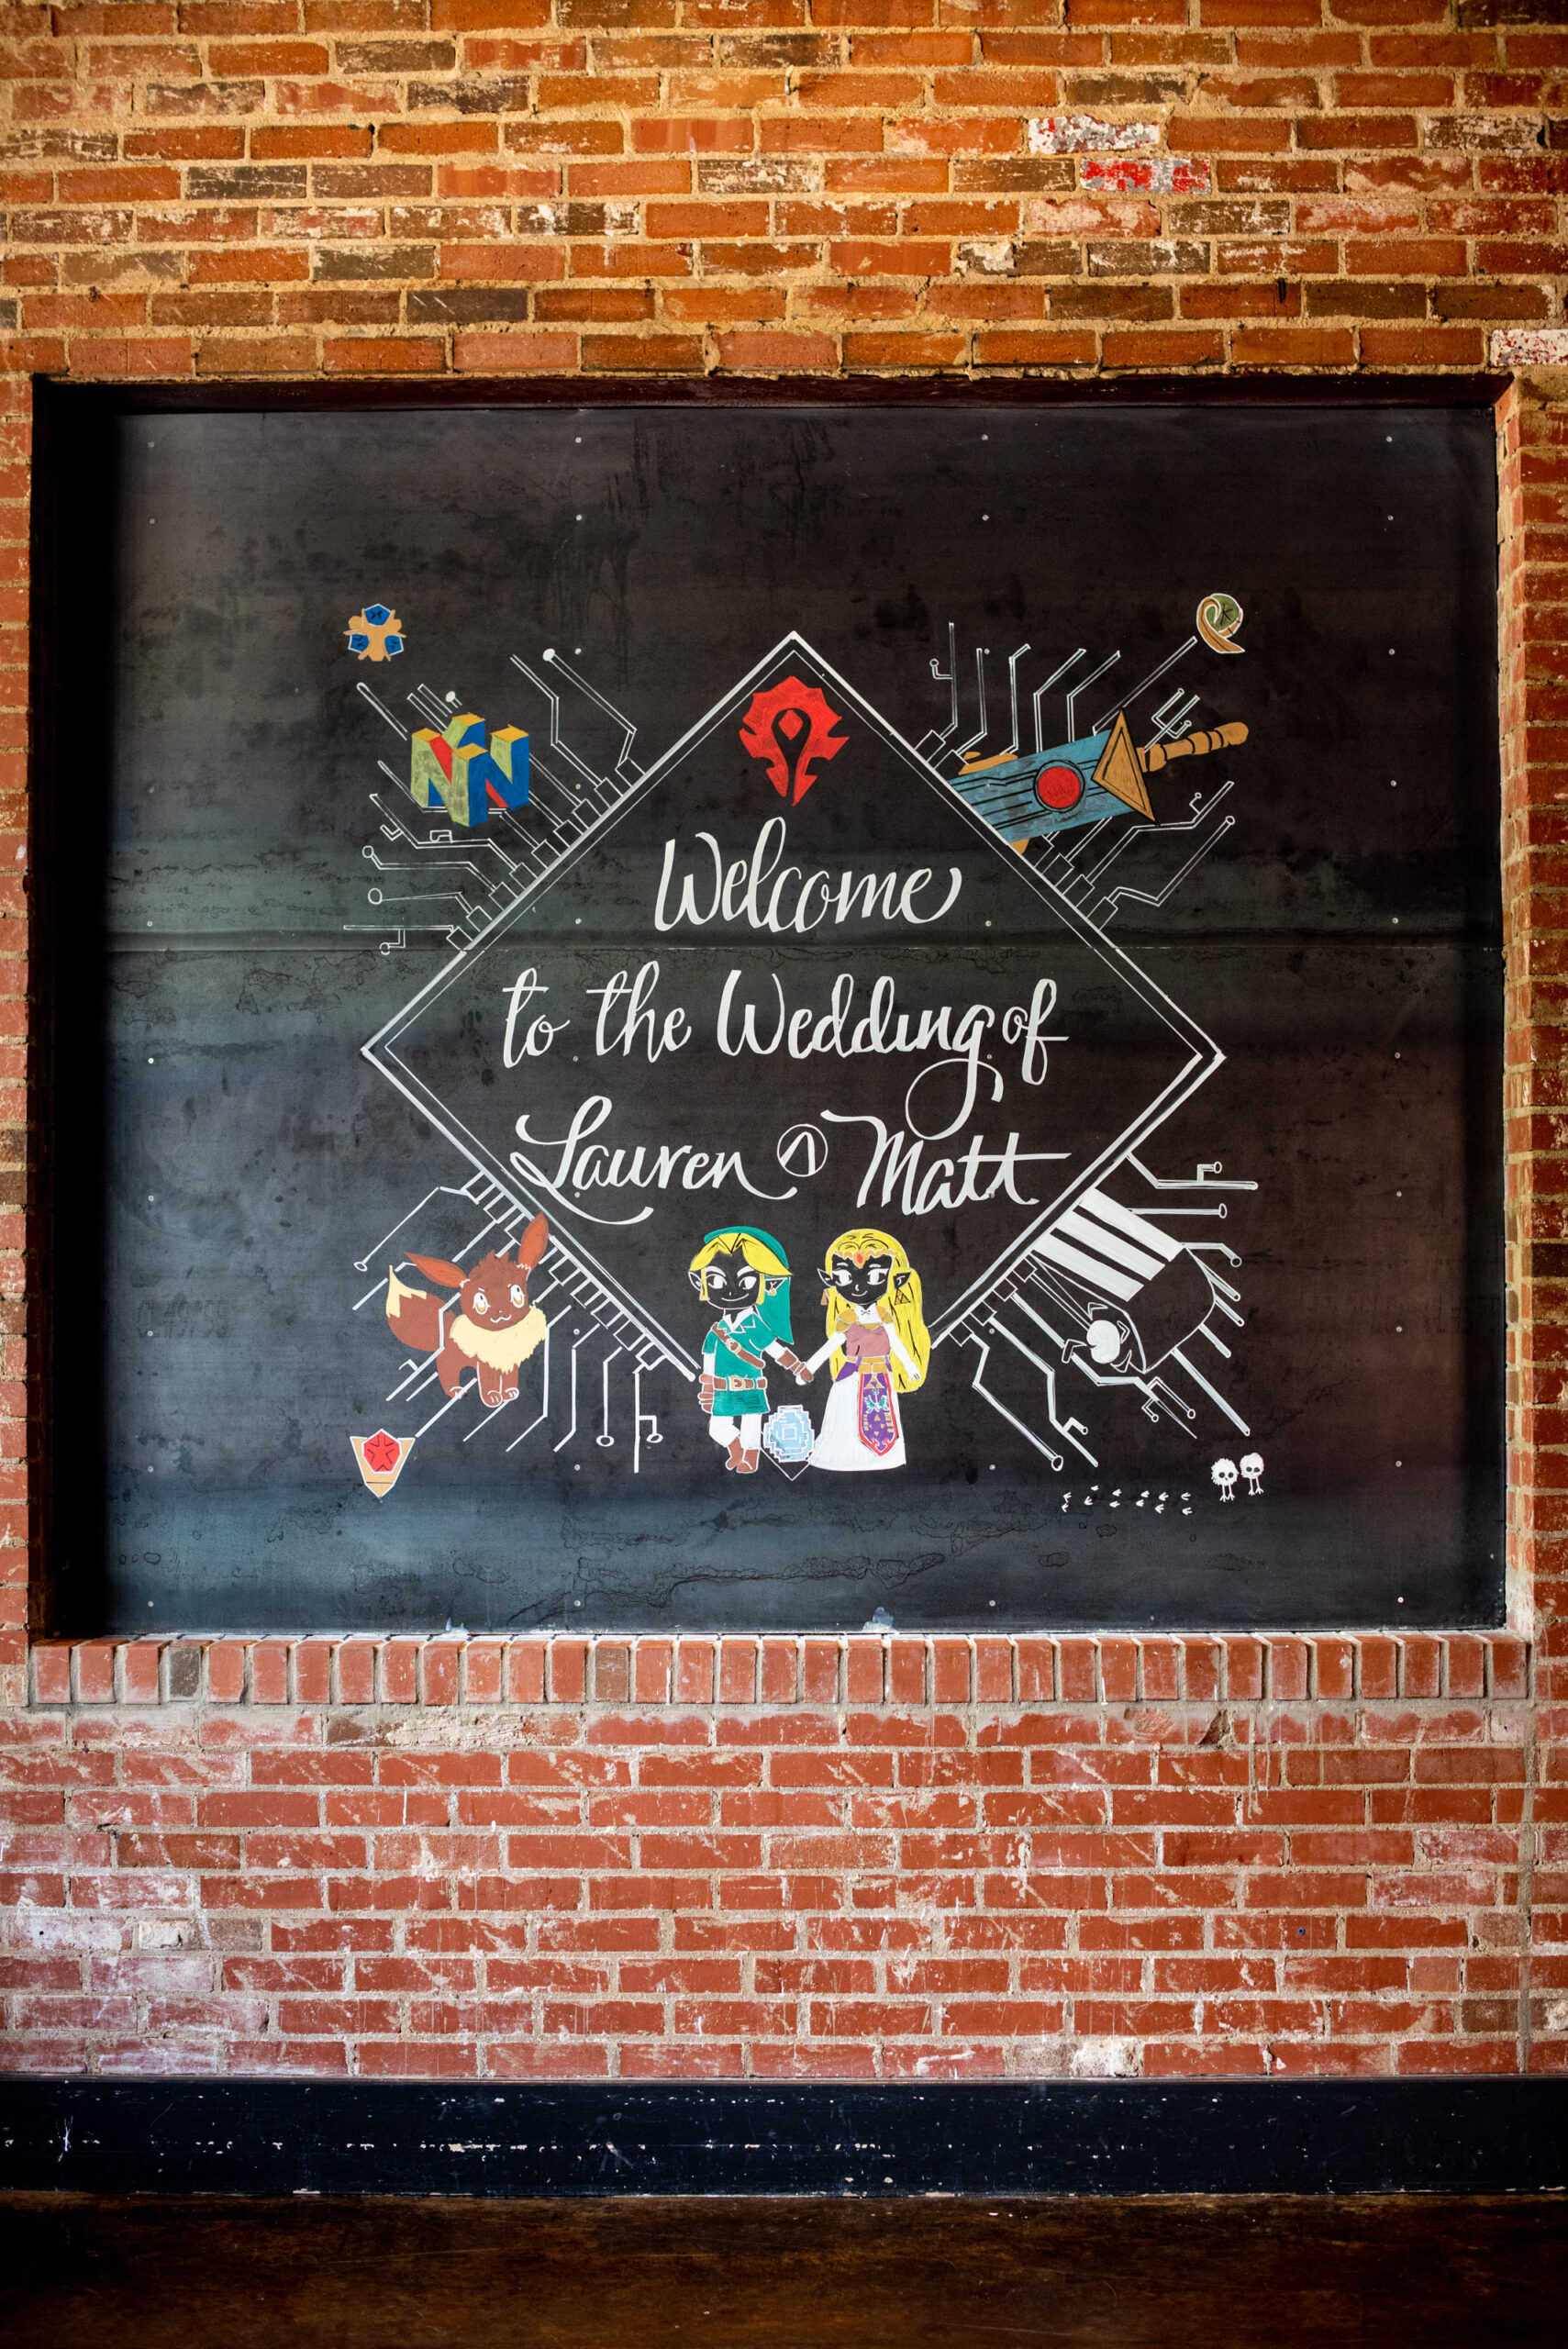 Chalkboard on a brick wall, showing colorful chalk drawings of various video game characters, including Zelda.